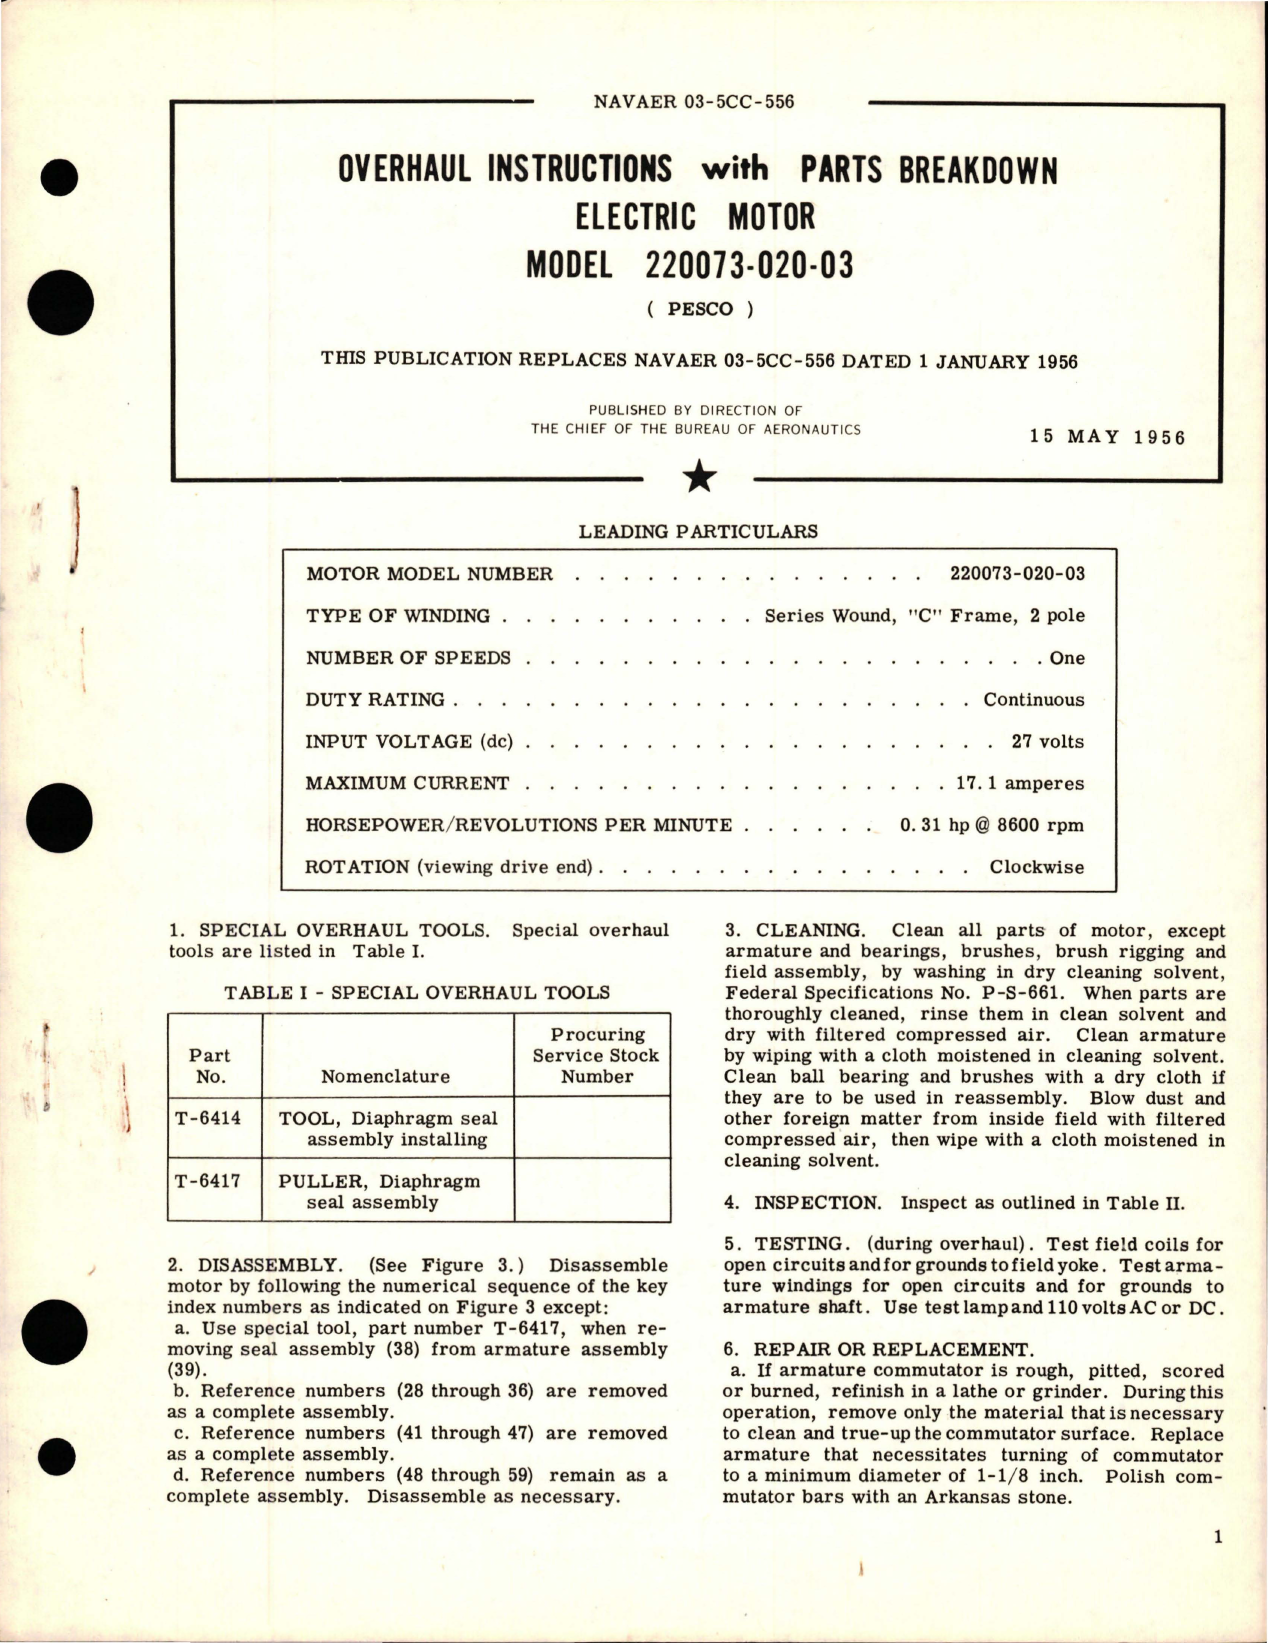 Sample page 1 from AirCorps Library document: Overhaul Instructions with Parts Breakdown for Electric Motor - Model 220073-020-03